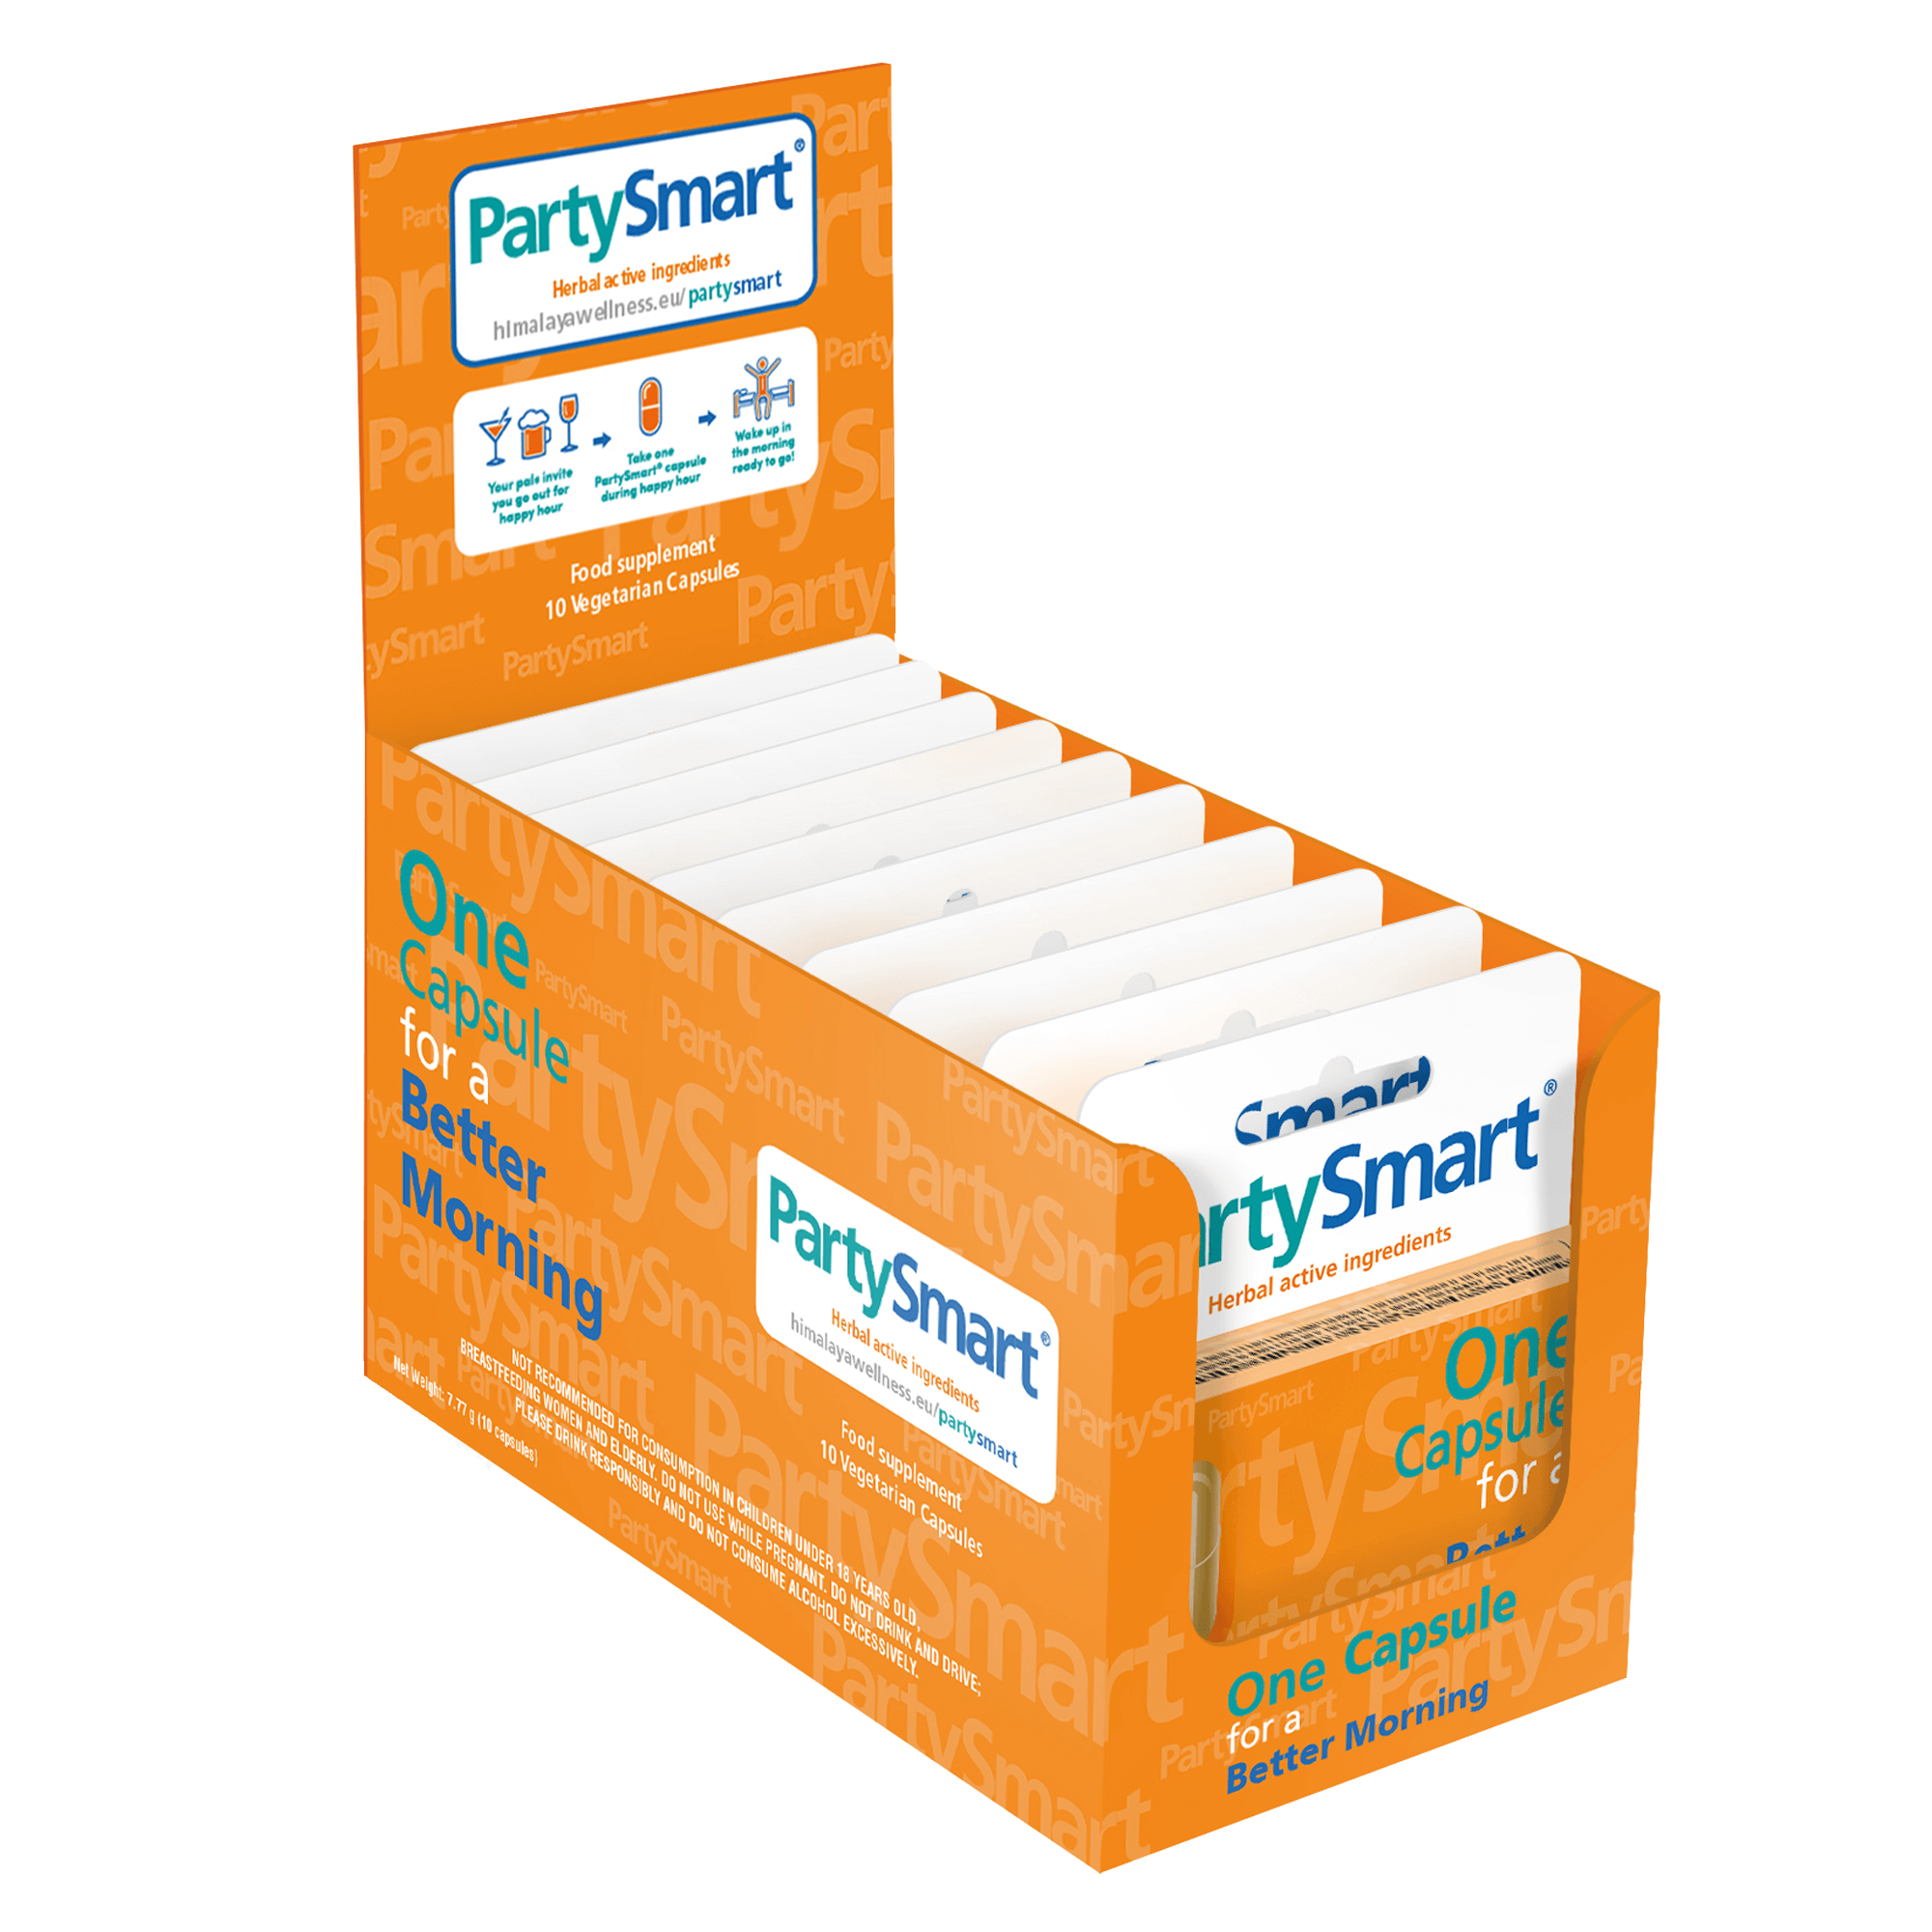 Himalaya PartySmart - 1's (Pack of 2)